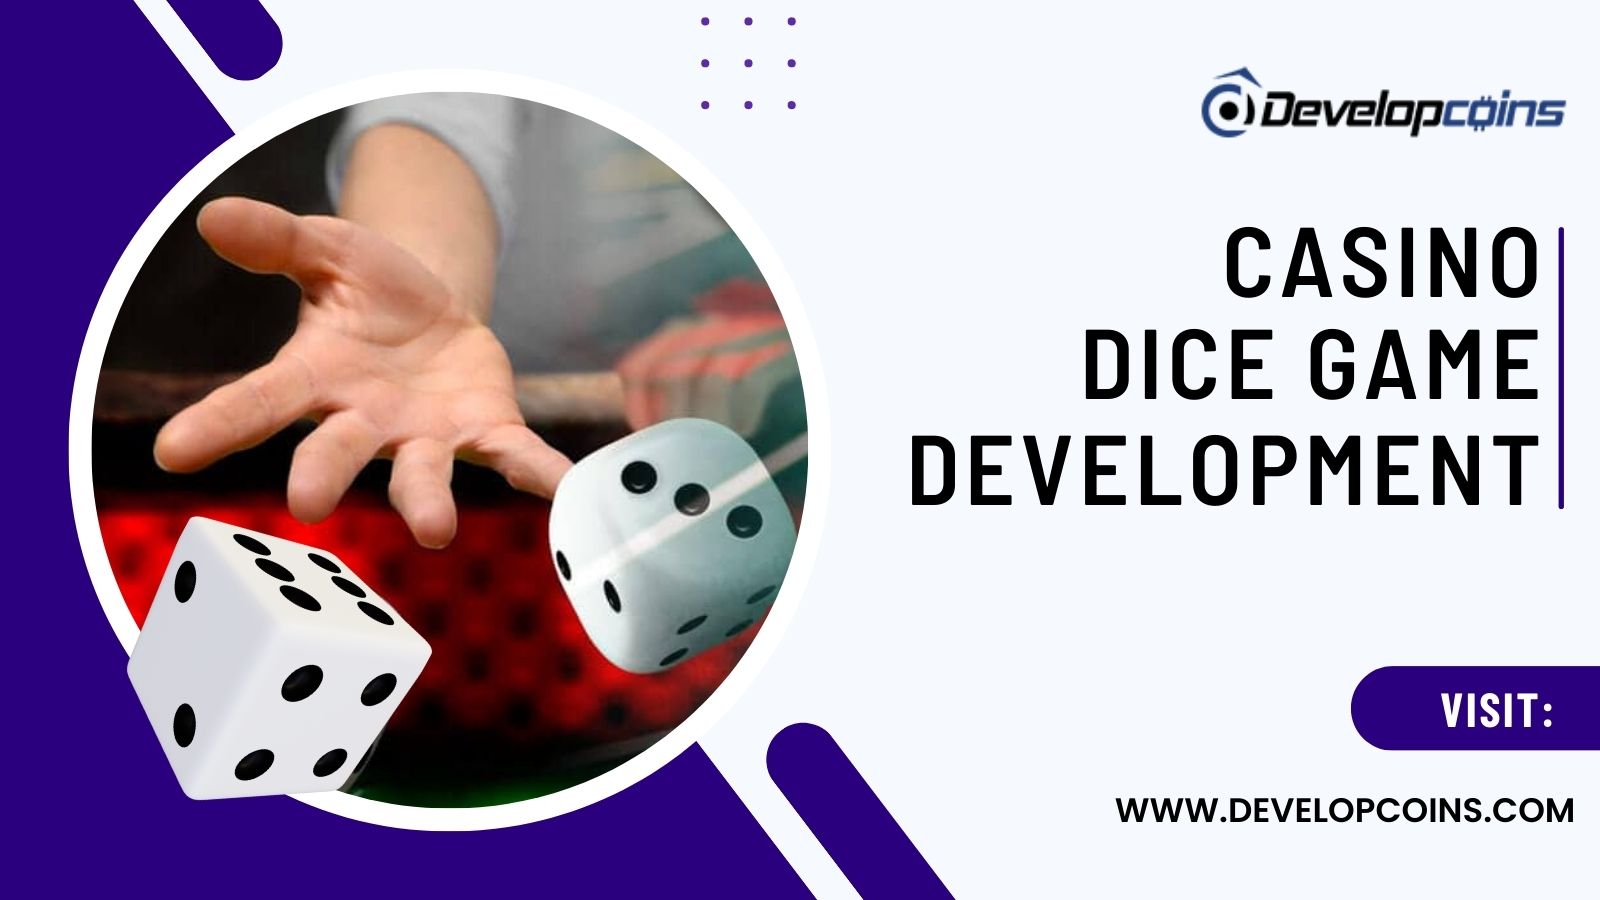 Dice Game Development: To Build The Classic Dice Game With Fascinating Modern Ideas